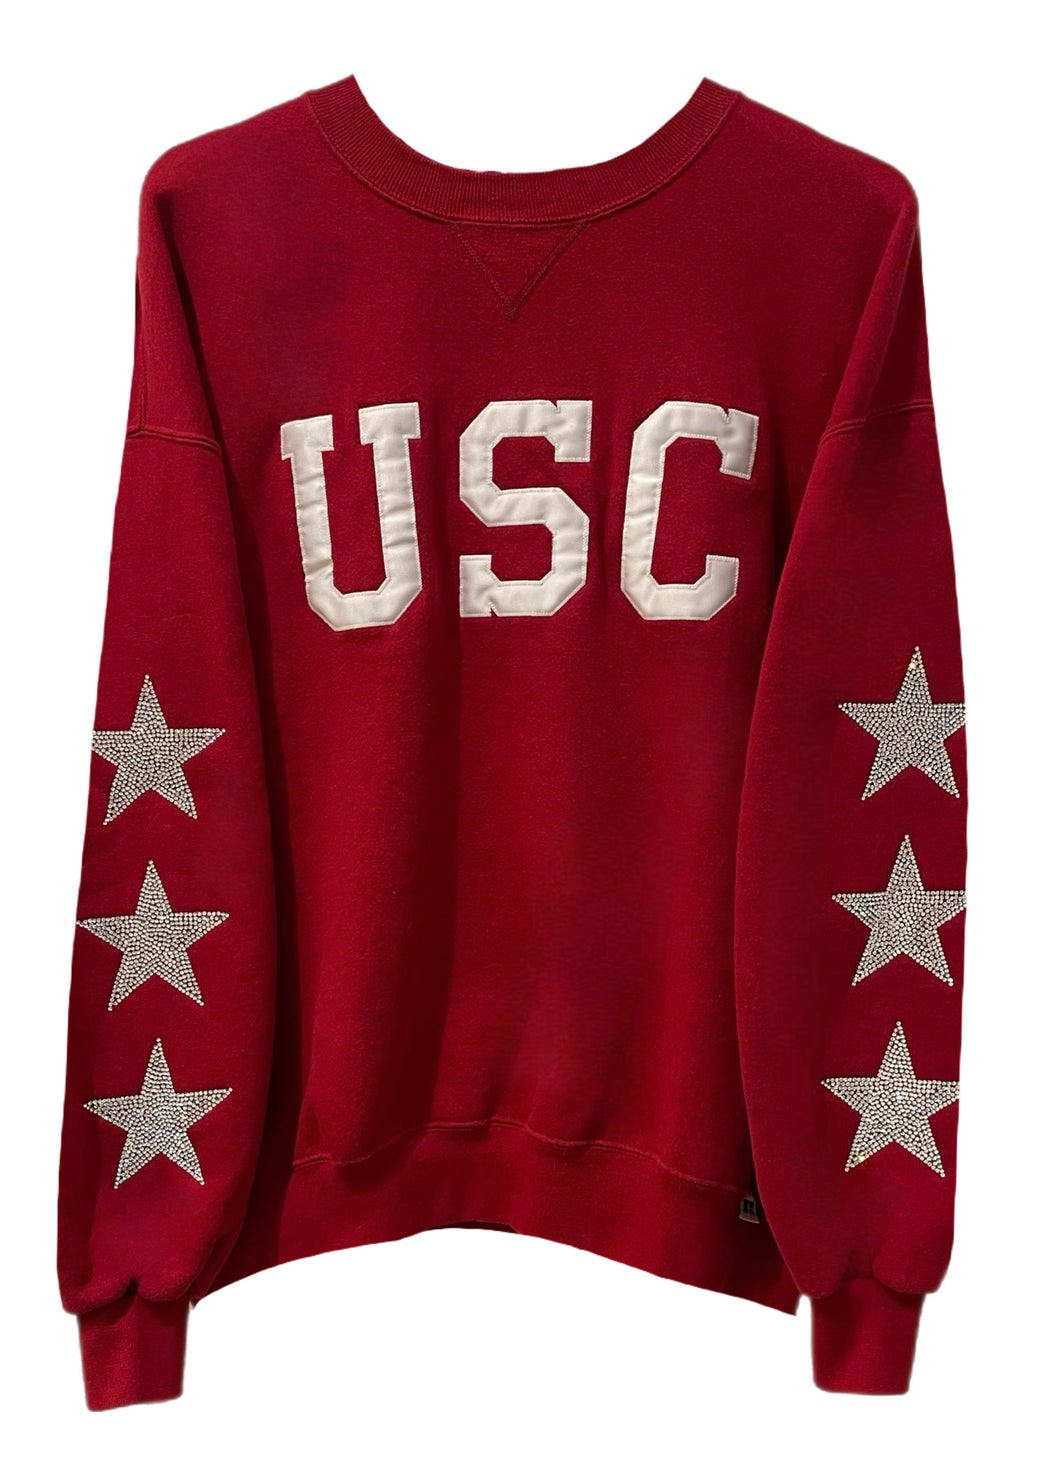 University of Southern California, USC One of a KIND Vintage Sweatshirt with Three Crystal Star Design